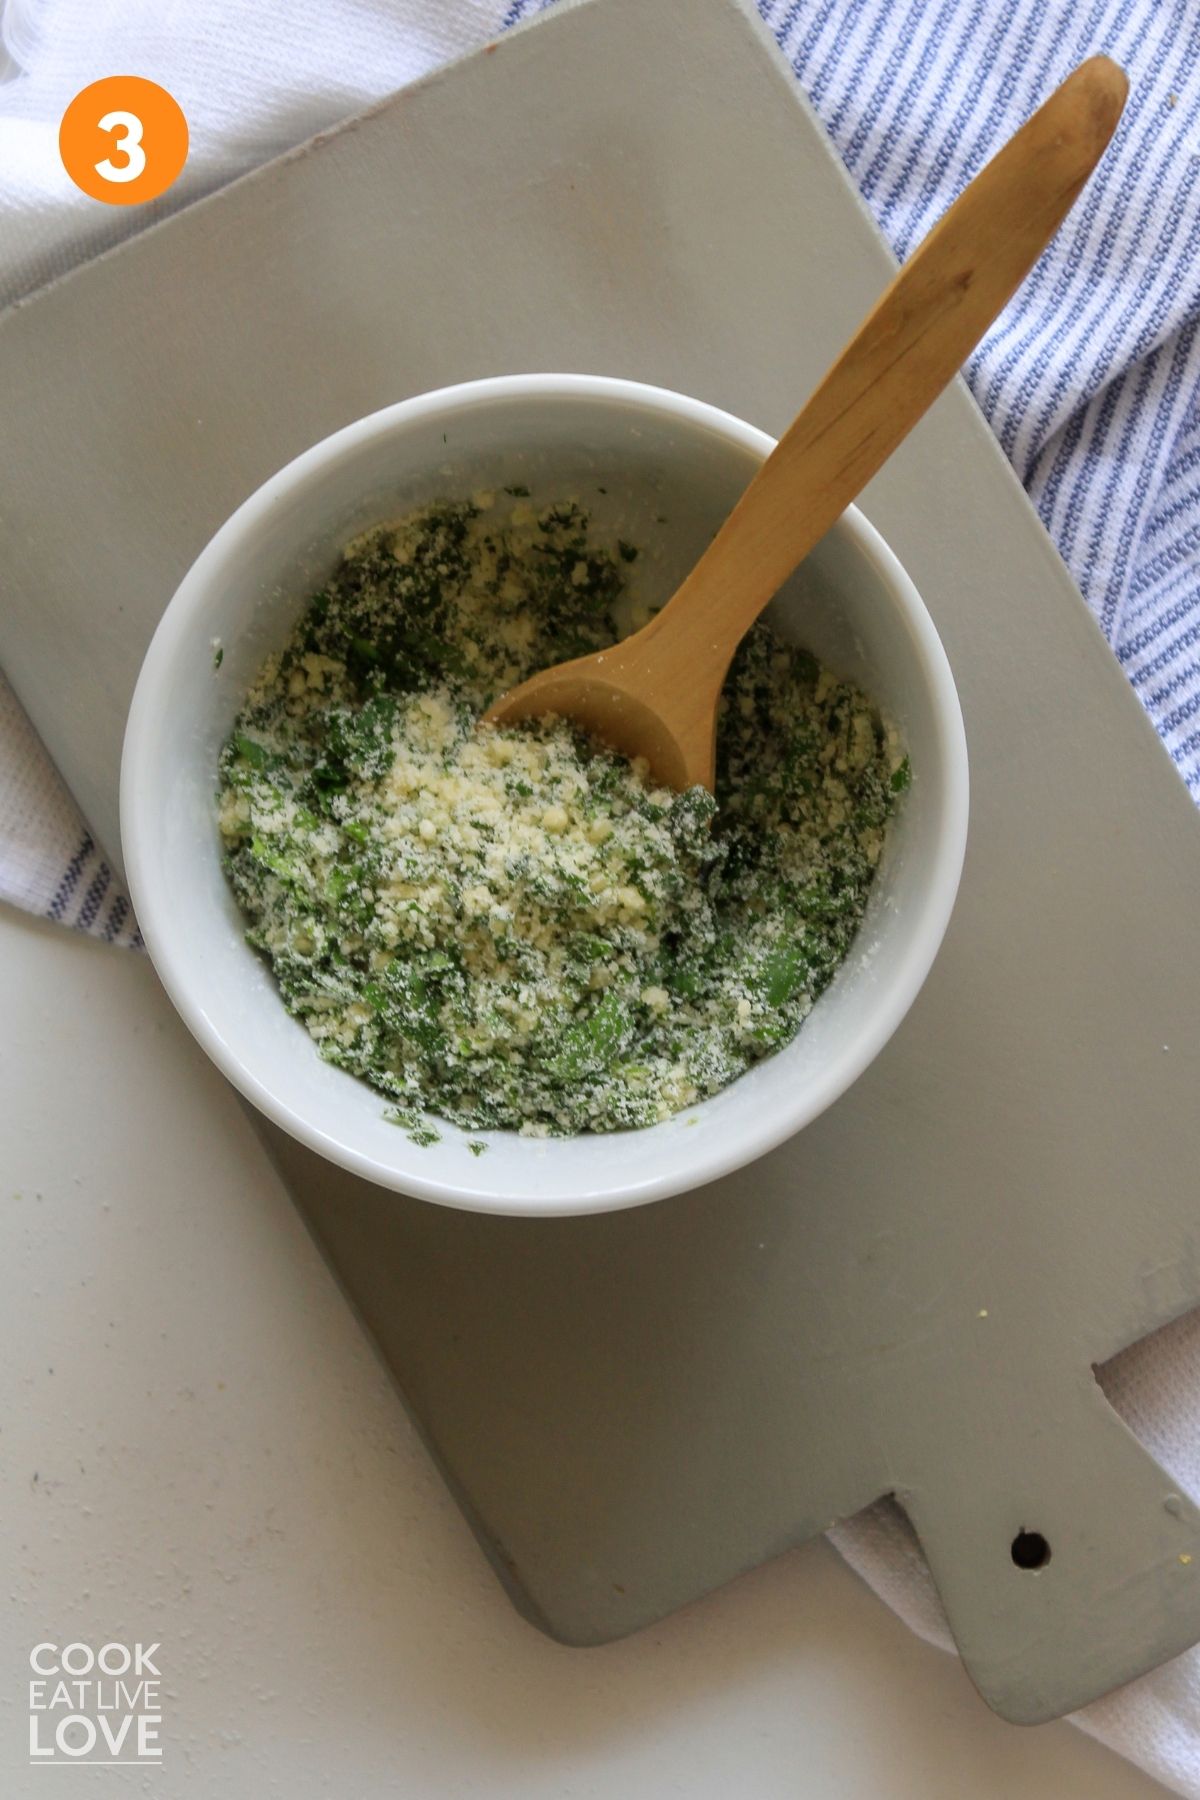 Cheese and herb topping in a bowl.